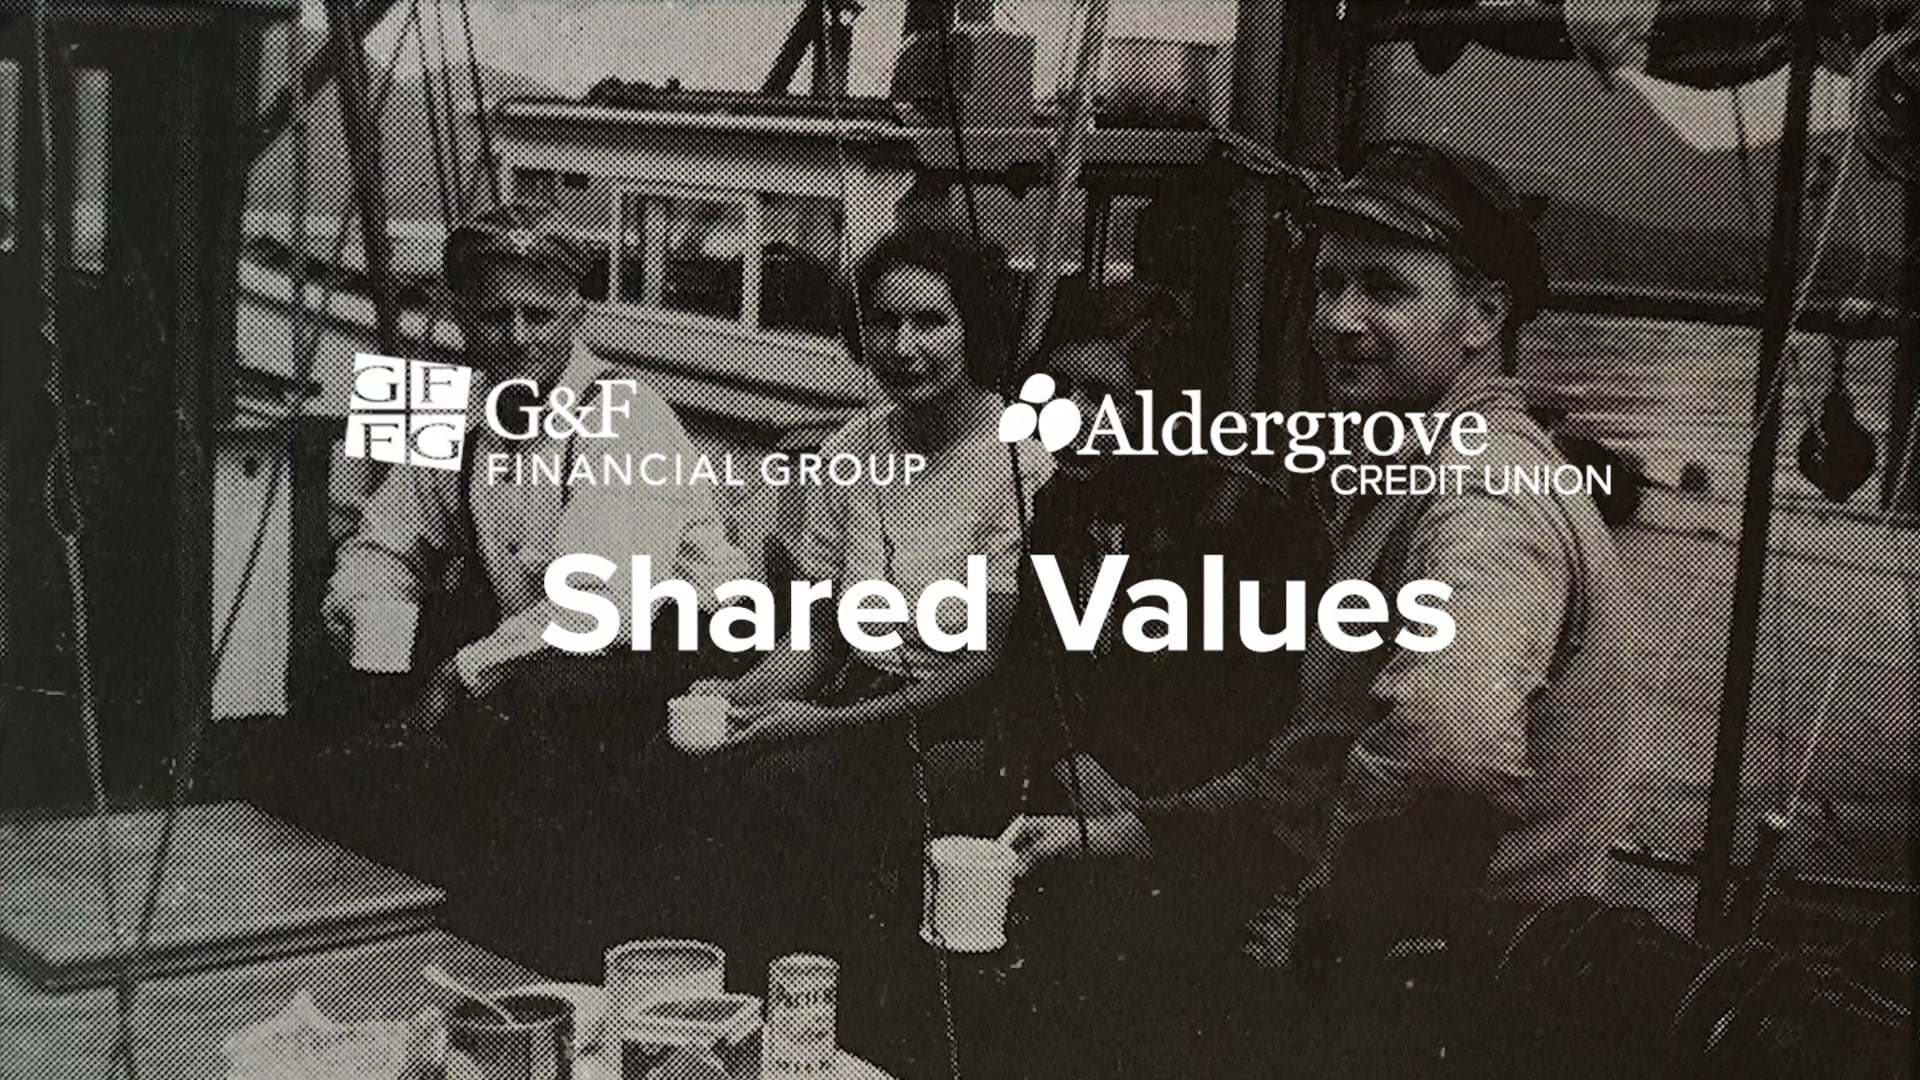 Shared Values | Aldergrove Credit Union and G&F Financial Group